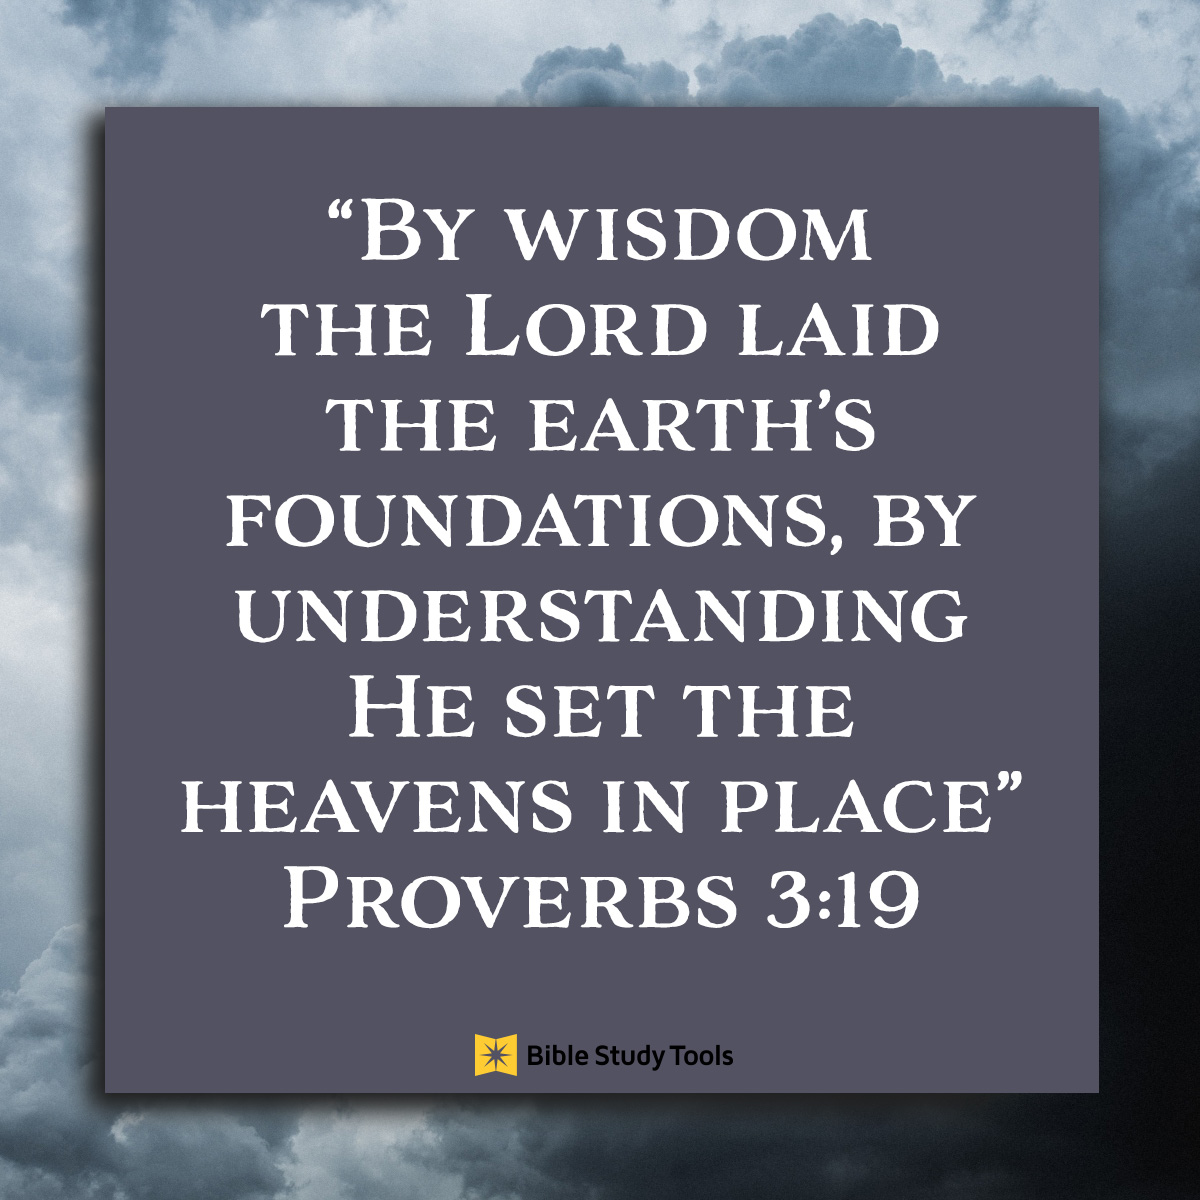 Proverbs-3-19, inspirational image